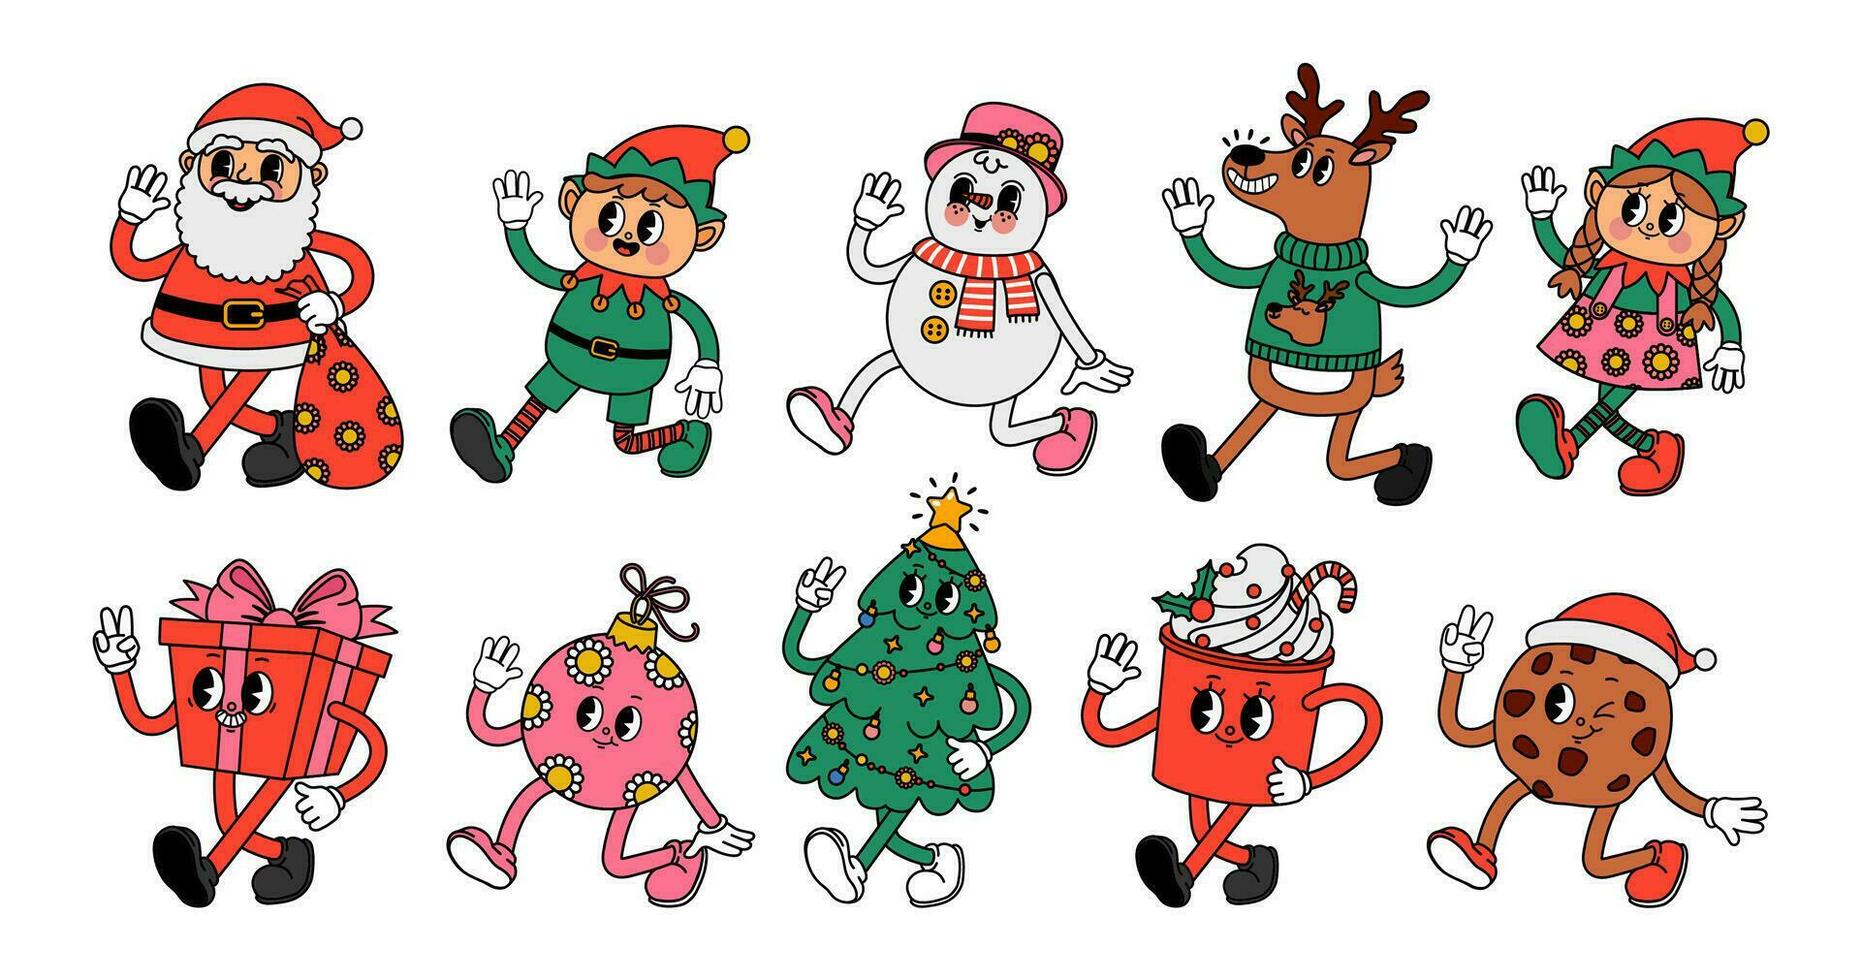 Christmas groovy character. Cartoon retro 30-s Xmas and New Year dynamic holiday characters. 70s vintage style Santa Claus with funny elves, cute snowman, deer vector set